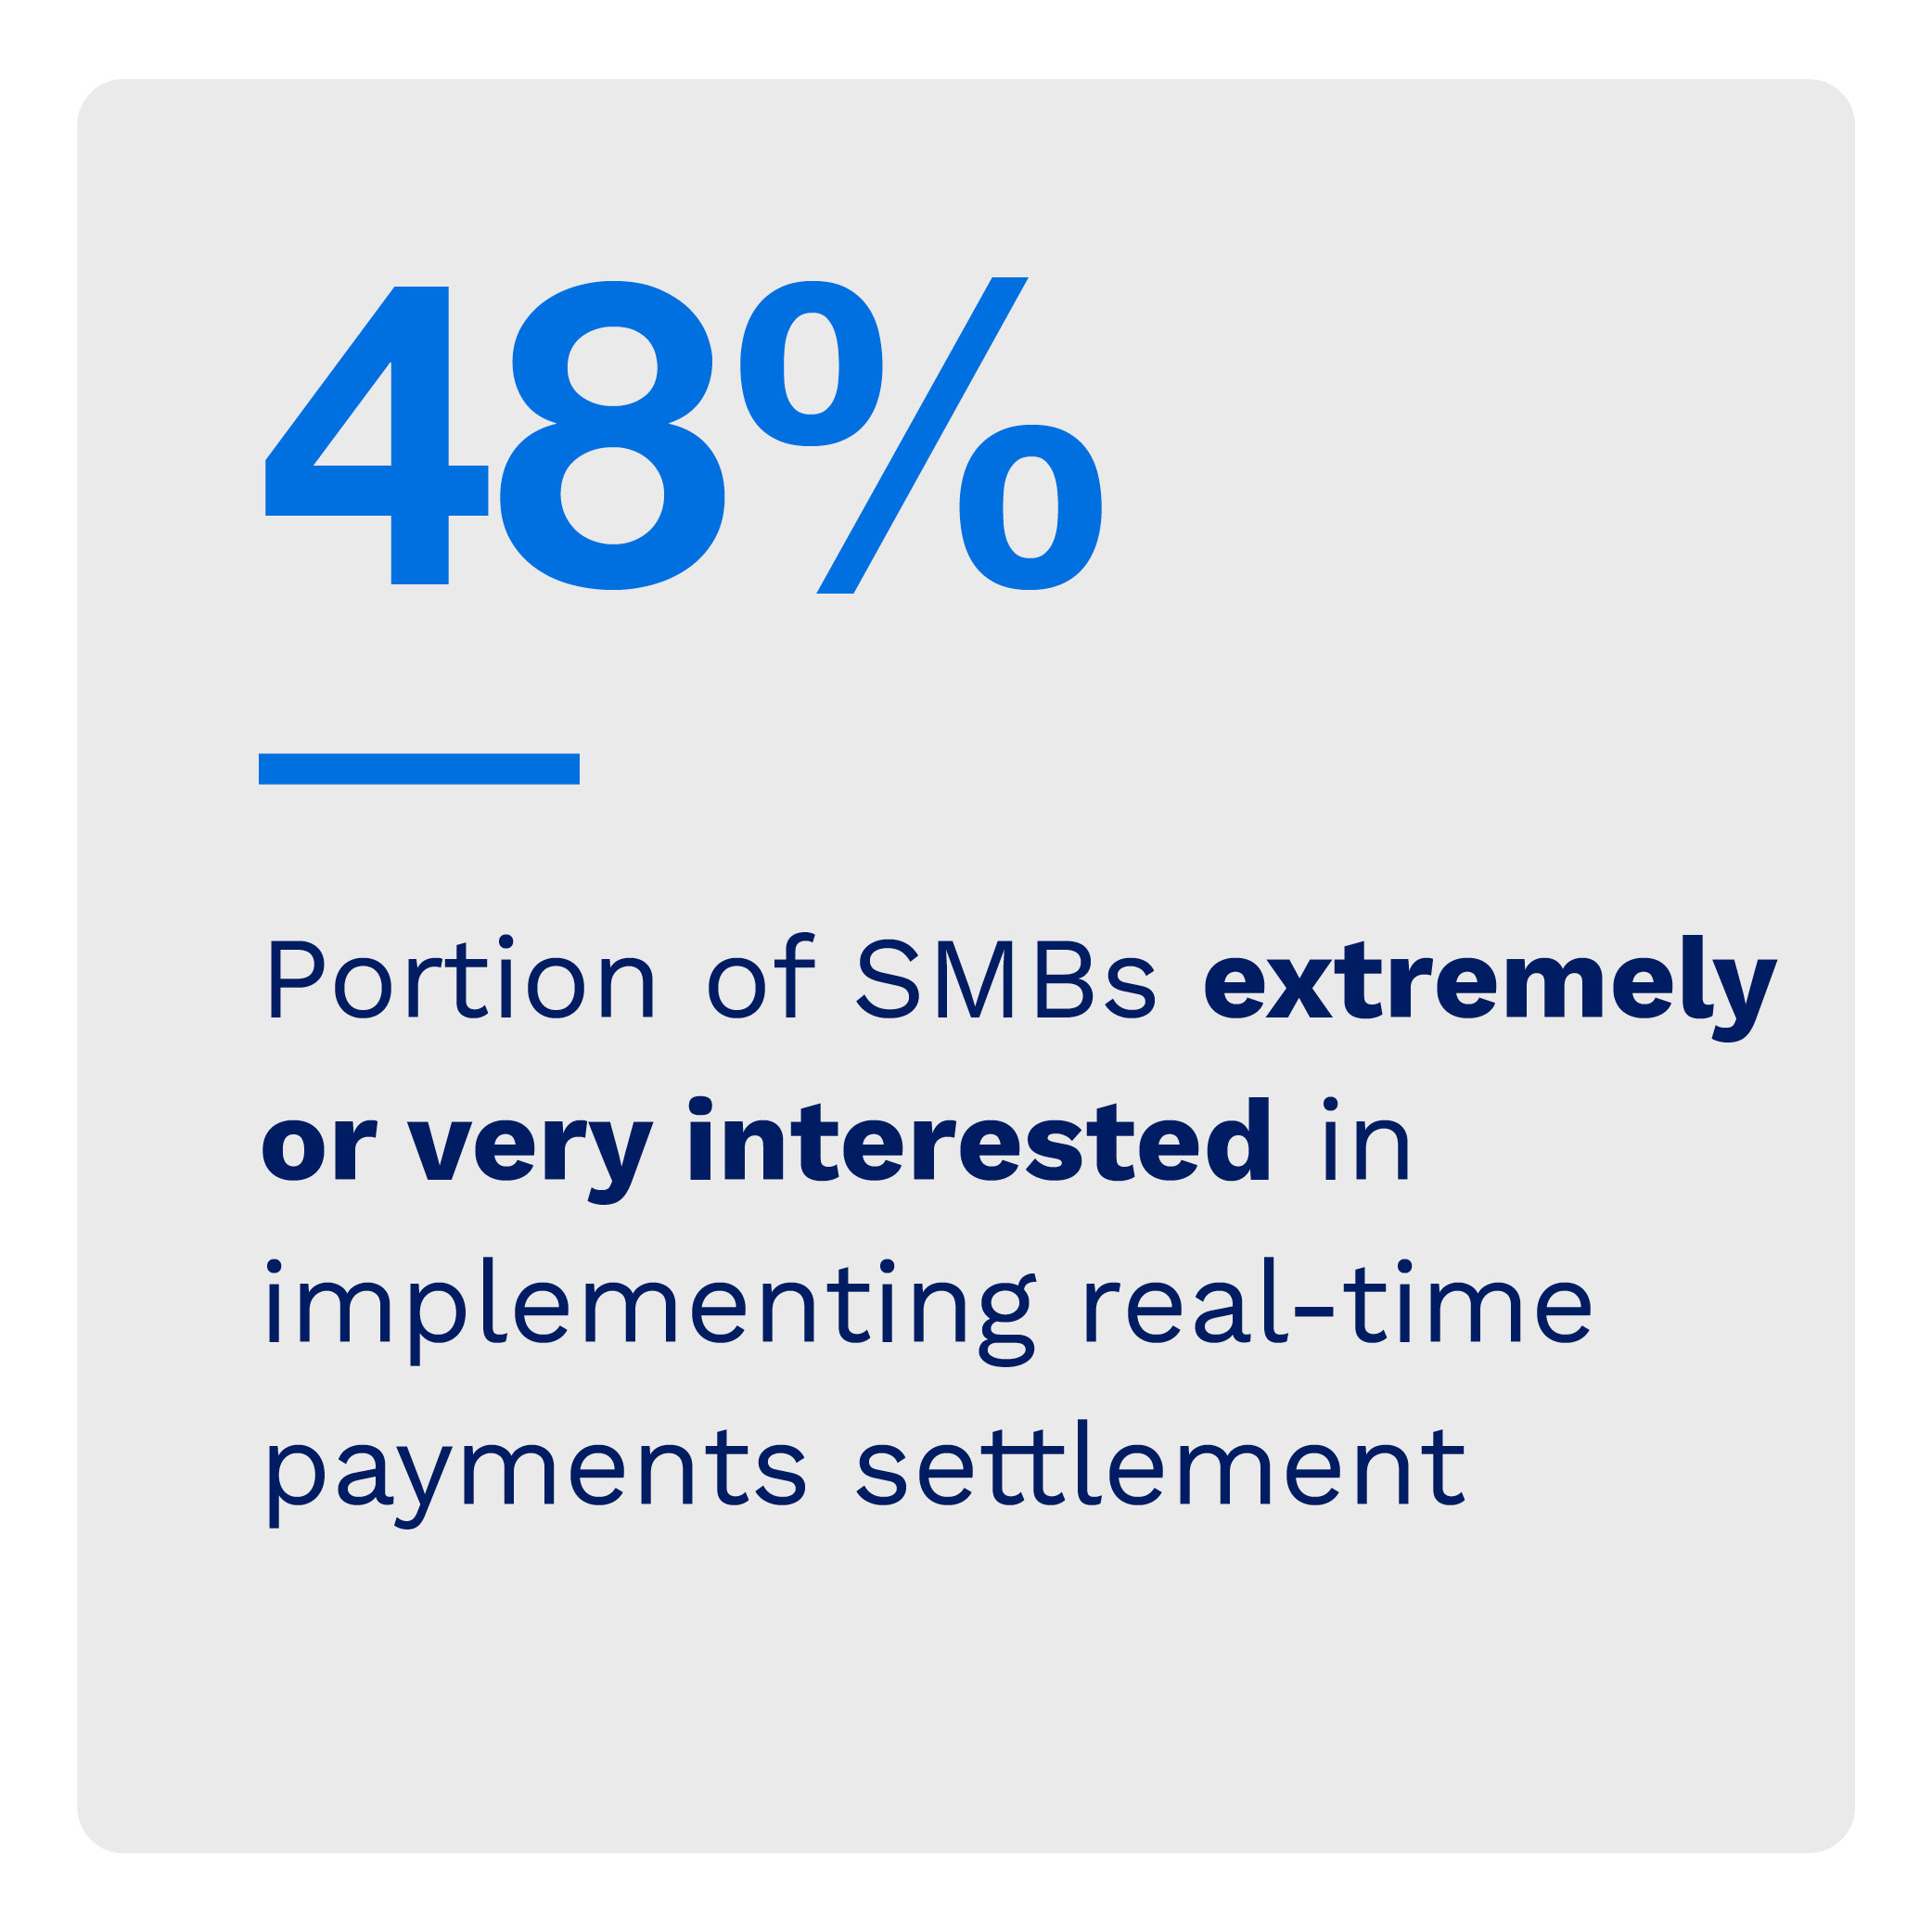 48%: Portion of SMBs extremely or very interested in implementing real-time payments settlement